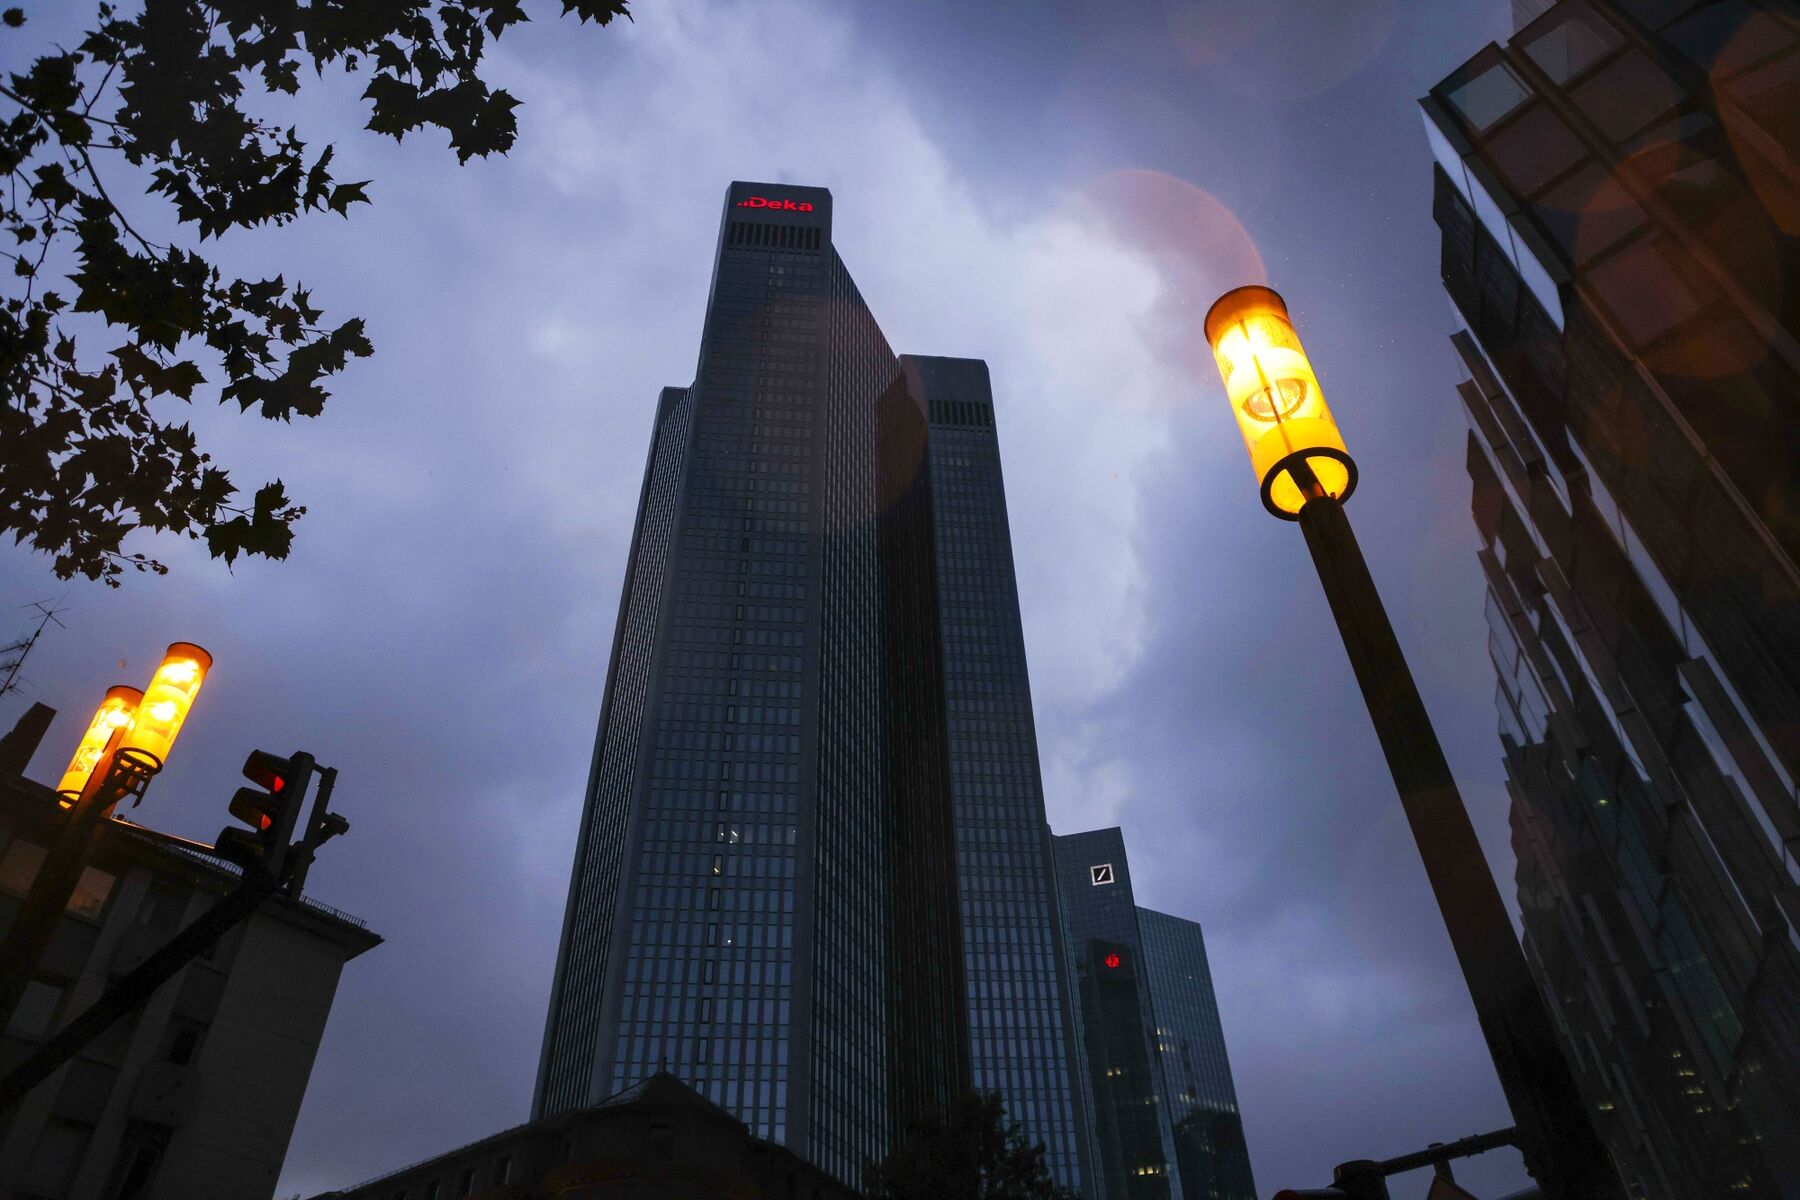 Germany's Financial Capital With Surging Delta Cases Slowing Return to Office